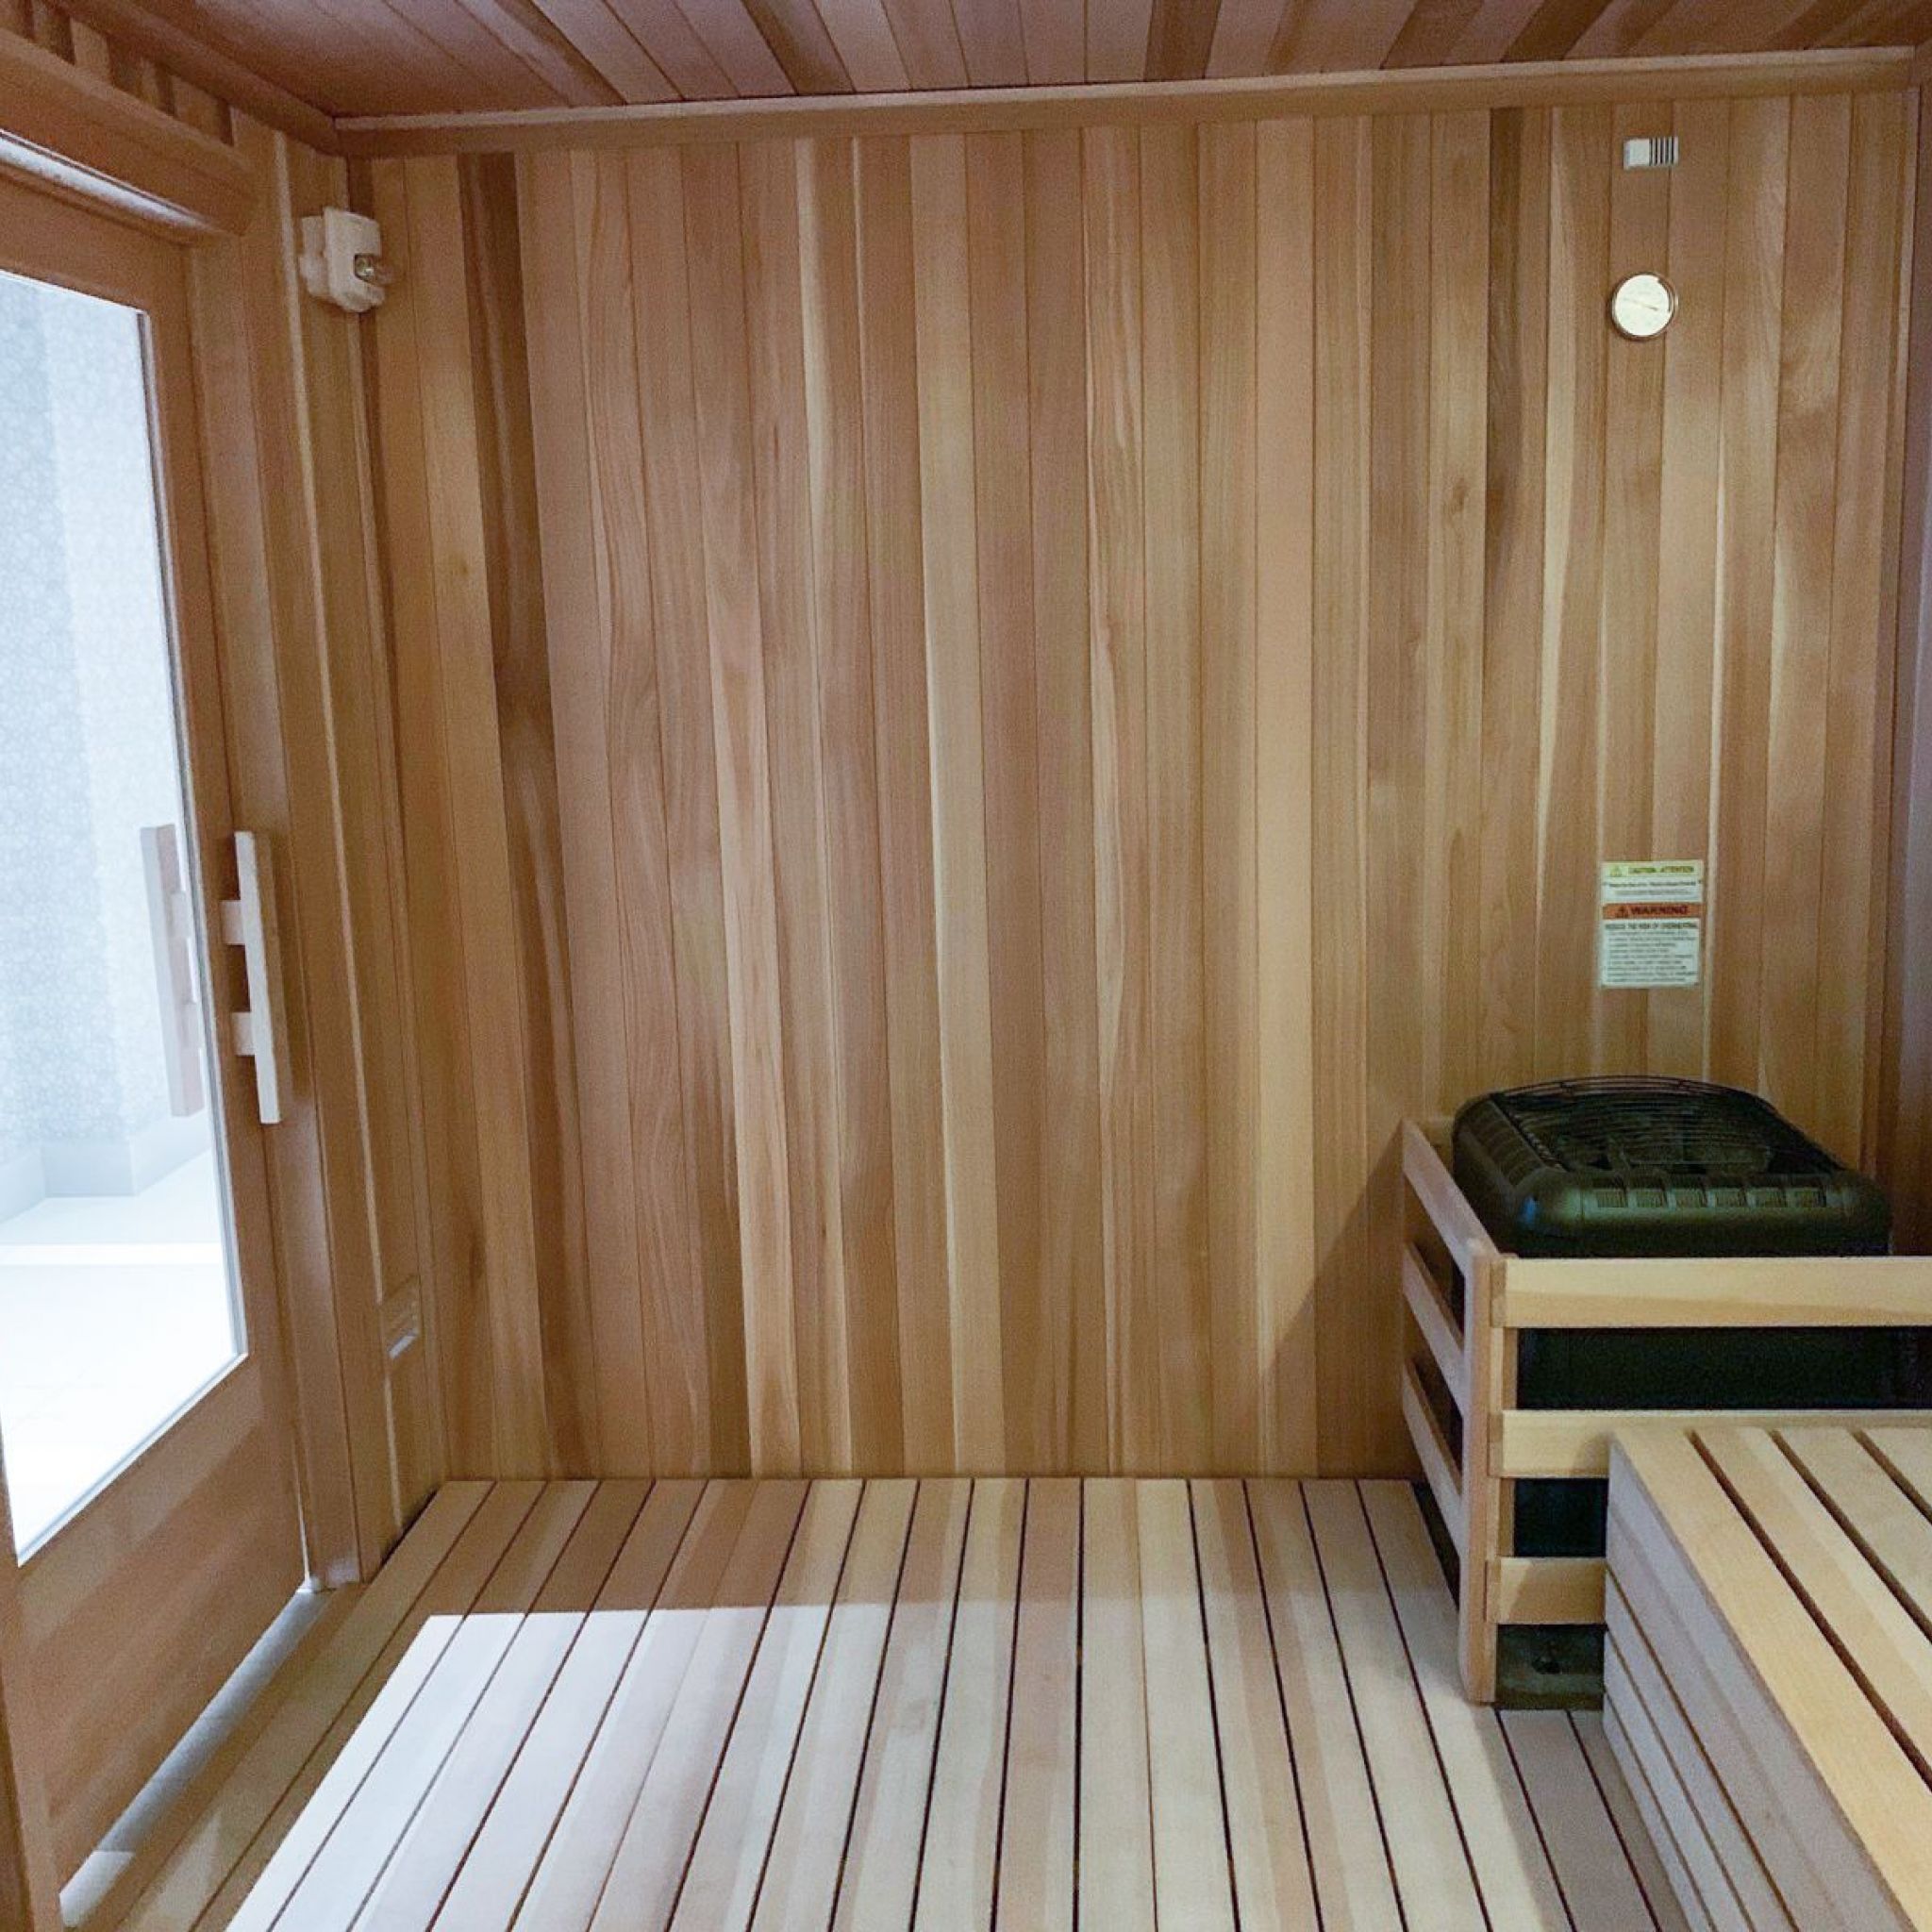 The Vue Charlotte sauna room in spa with wood paneling